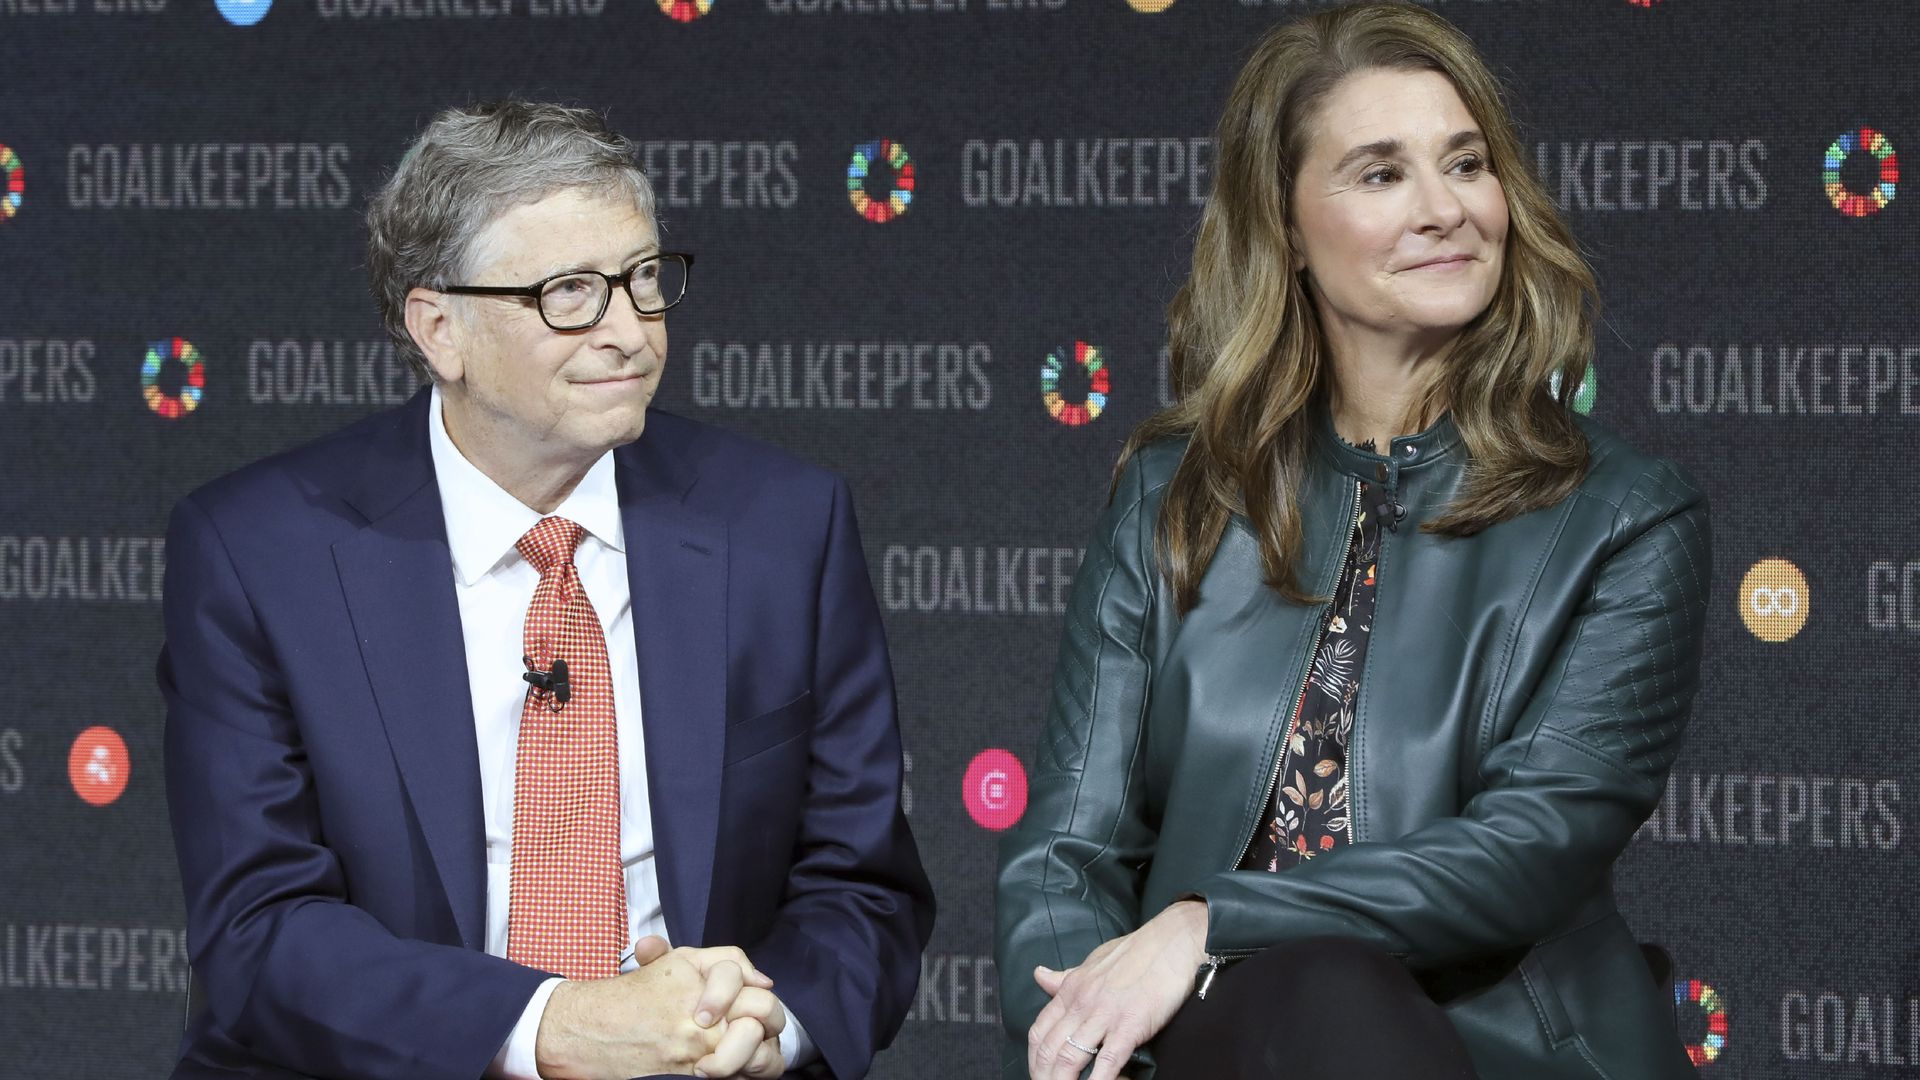 Bill and Melinda Gates sit next to each other with a wall that says "Goalkeepers" several times